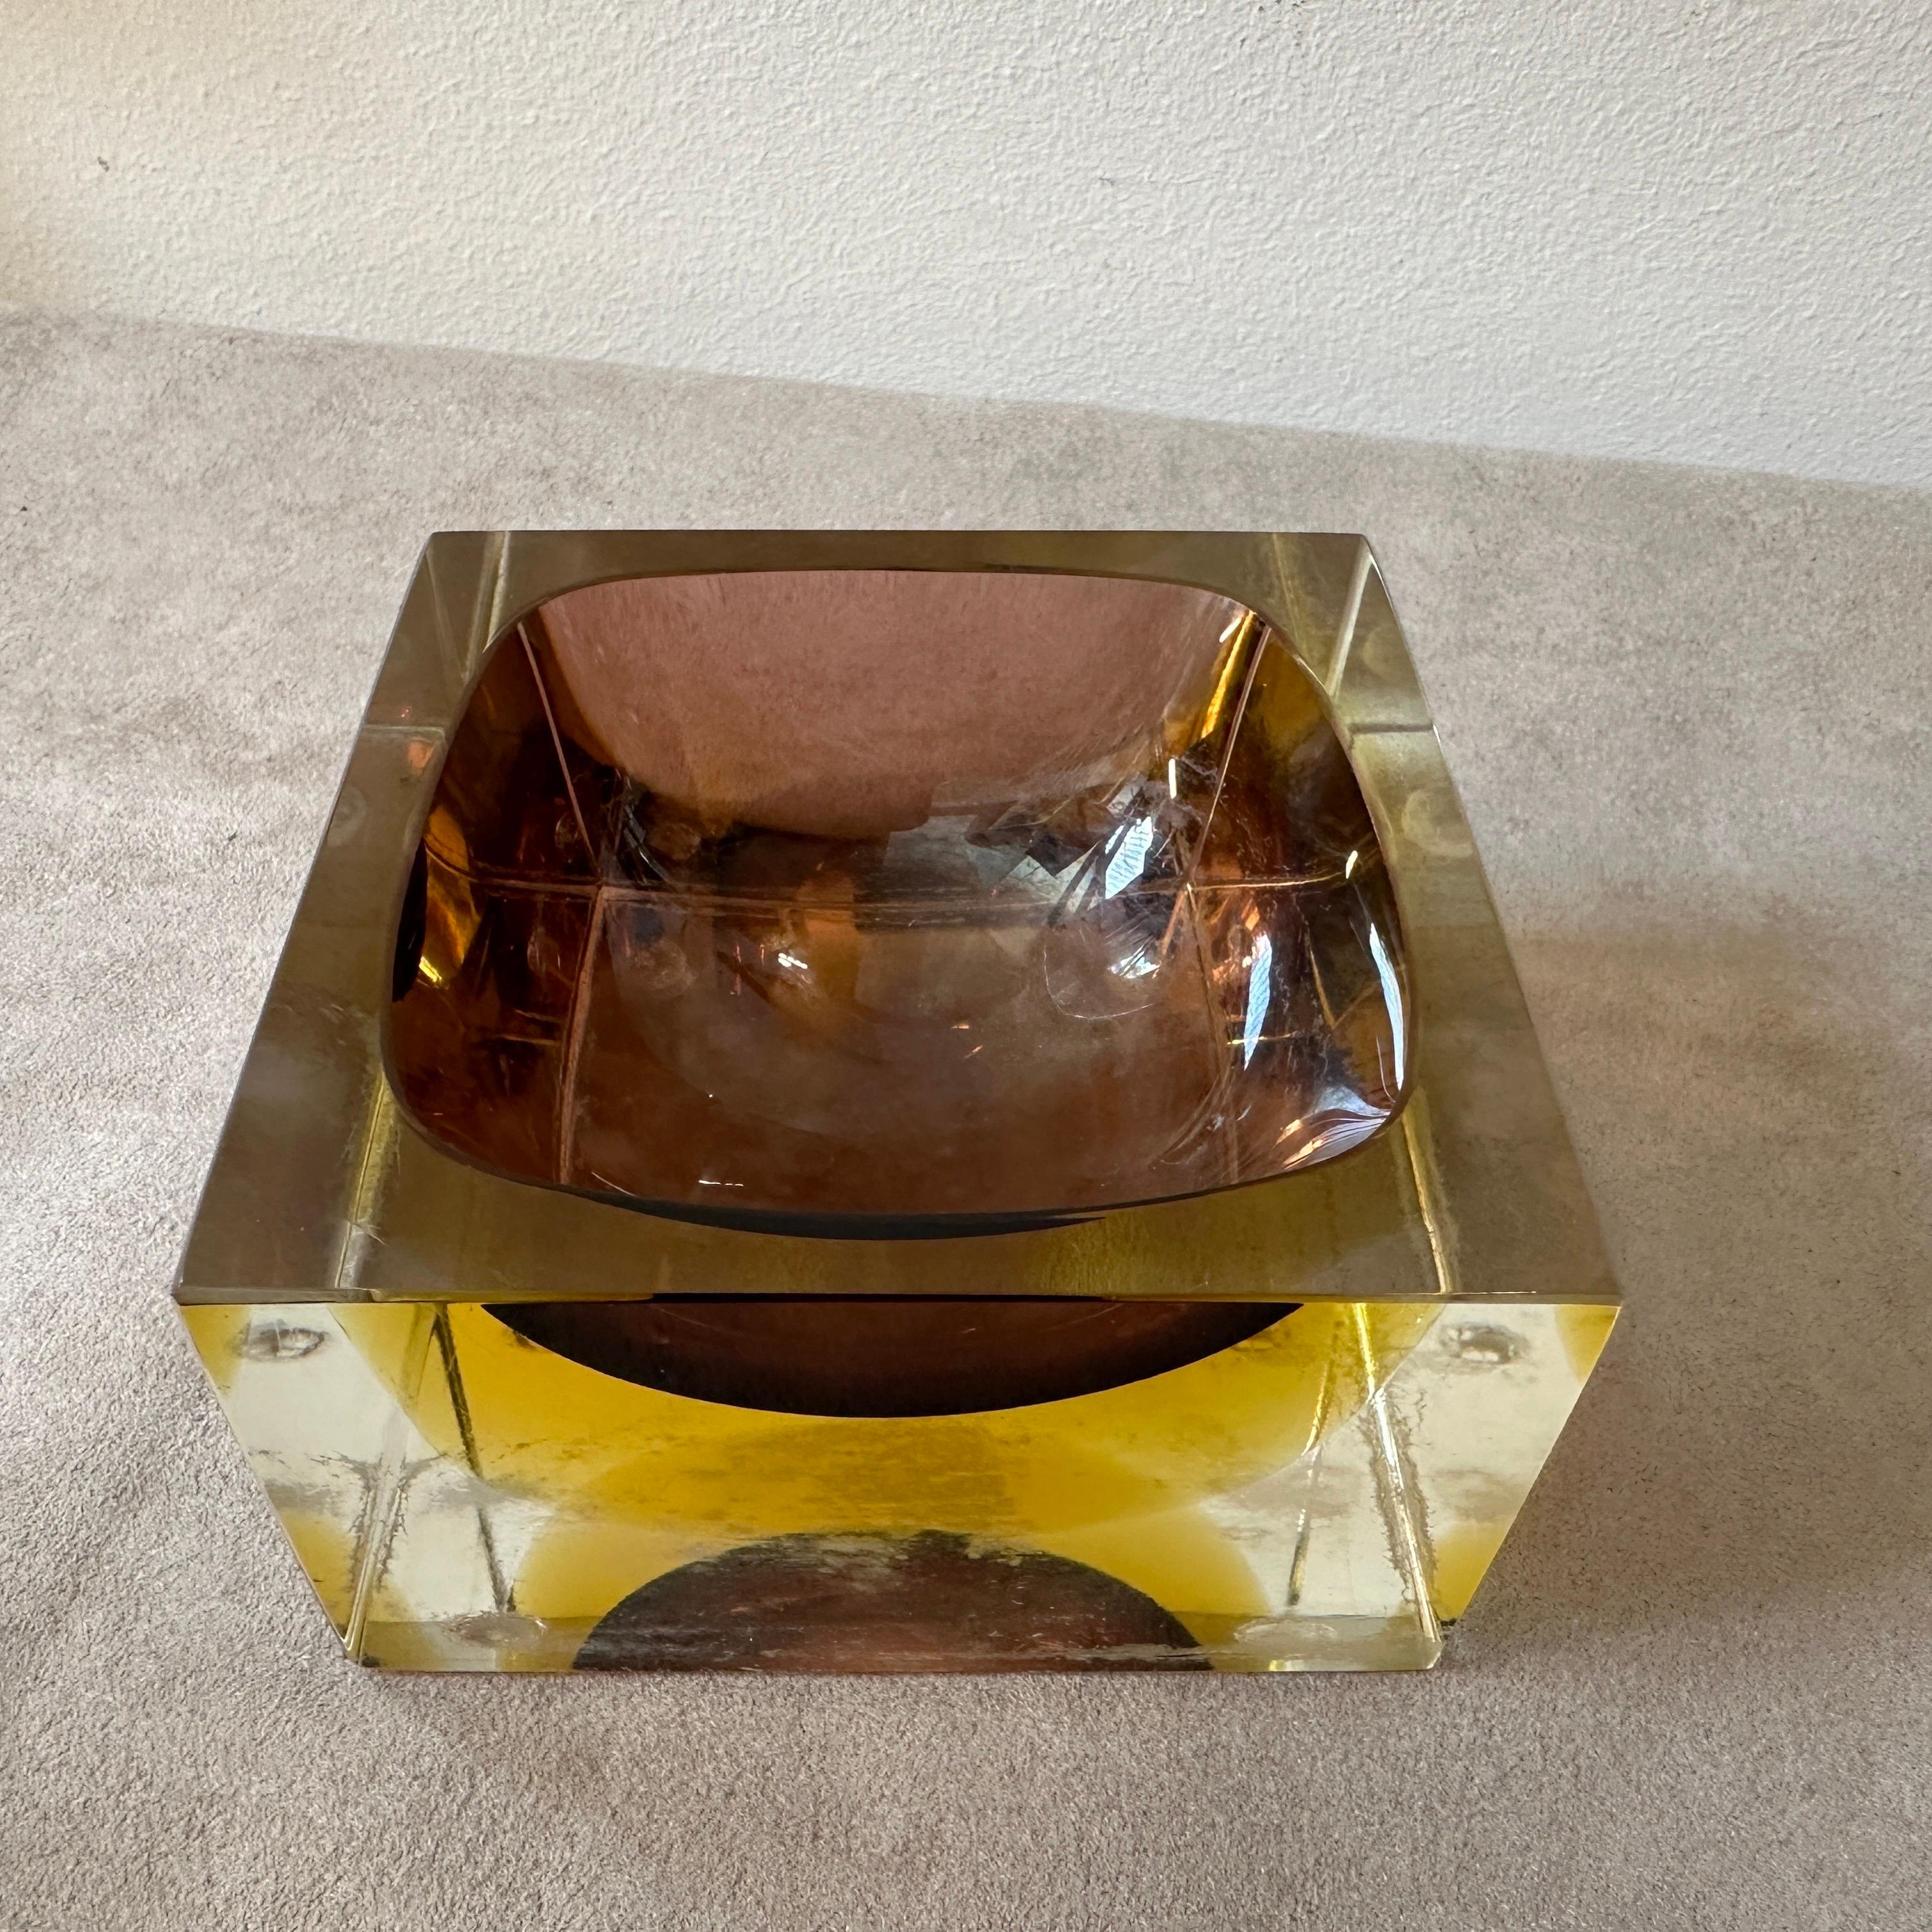 1970s Modernist Yellow and Brown Sommerso Murano Glass Ashtray by Mandruzzato In Good Condition For Sale In Aci Castello, IT